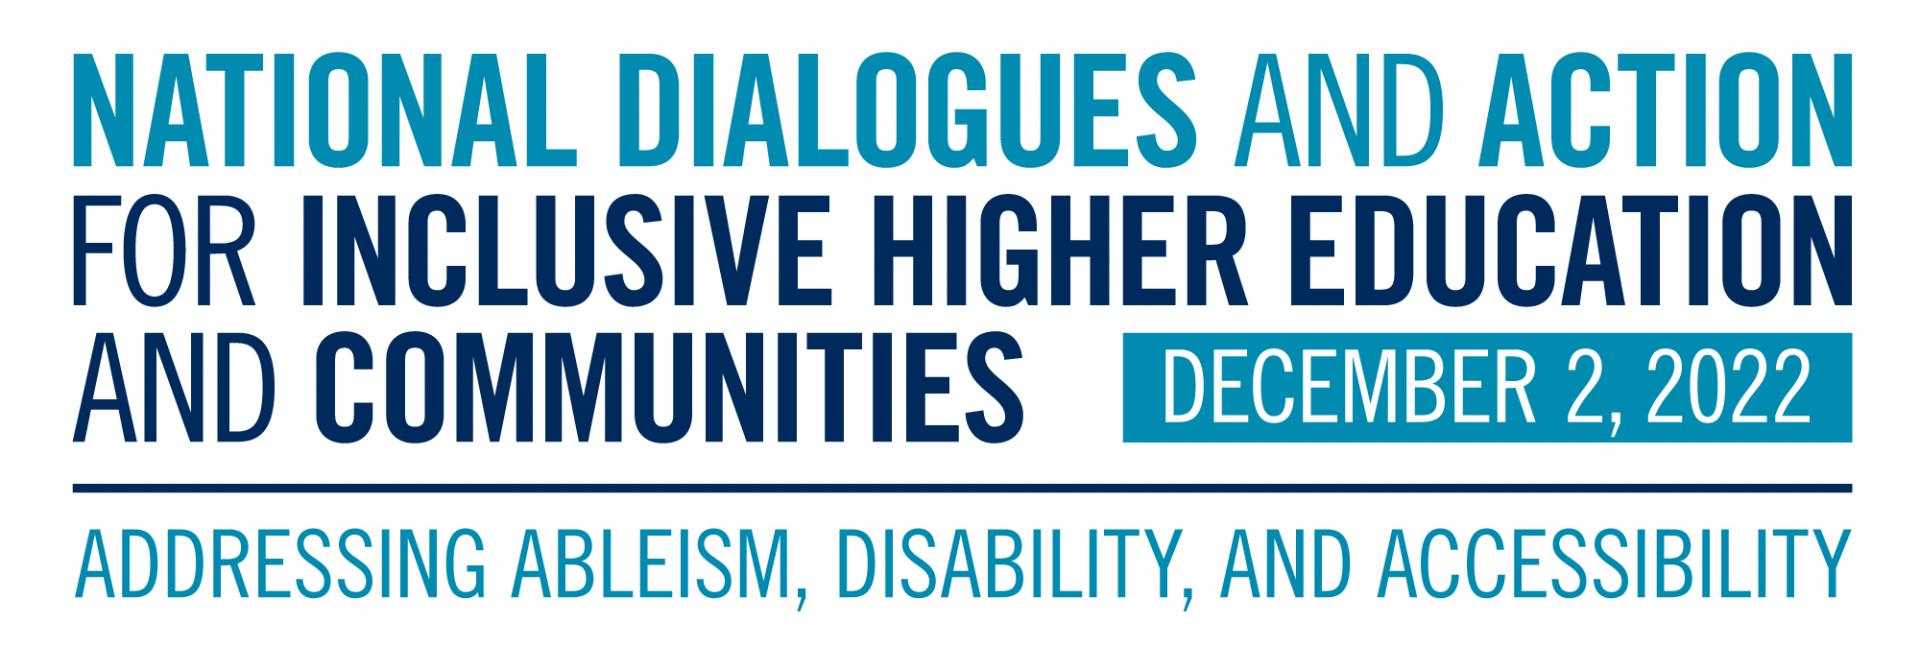 National Dialogues and Action for Inclusive Higher Education and Communities - December 2nd 2022 - Addressing Ableism, Disability, and Accessibility in Canadian Higher Education